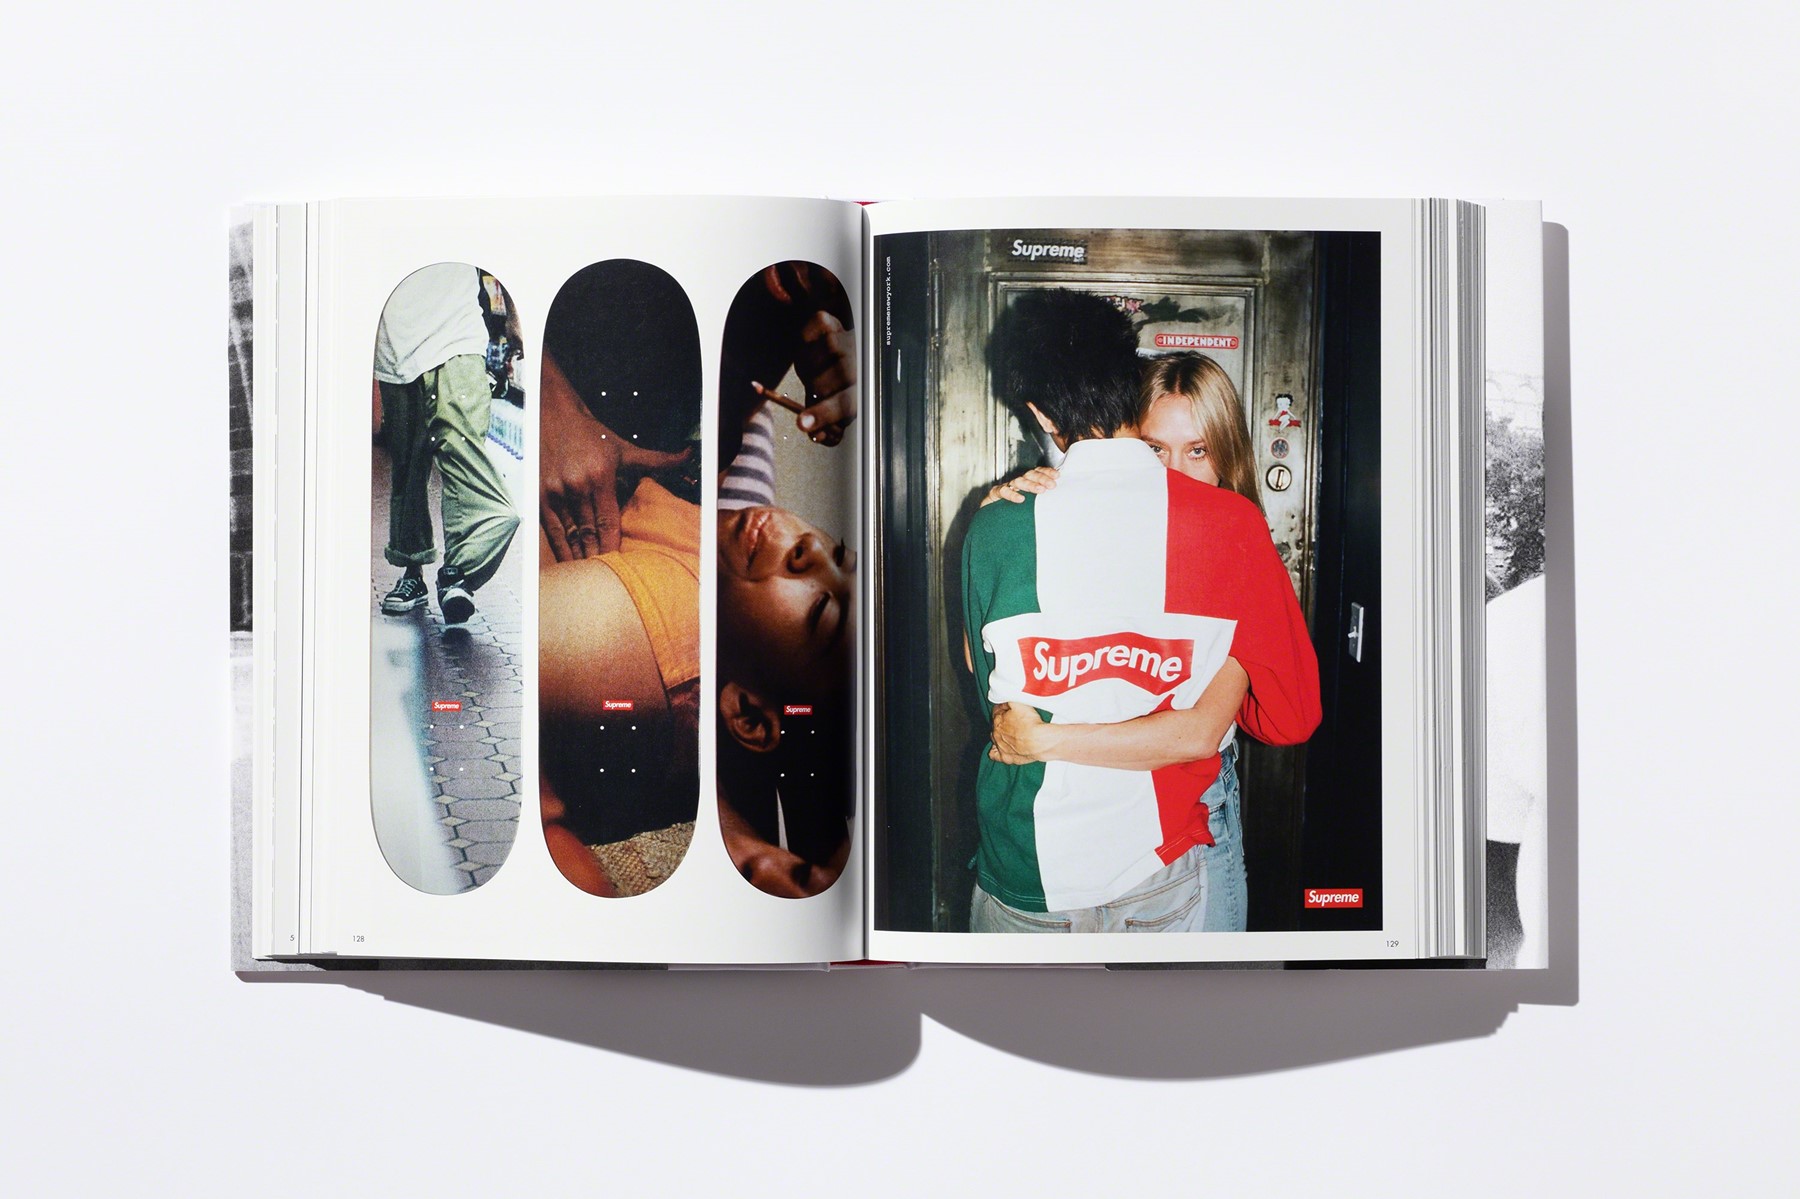 Harmony Korine's poetry features in Supreme's newest book | Dazed